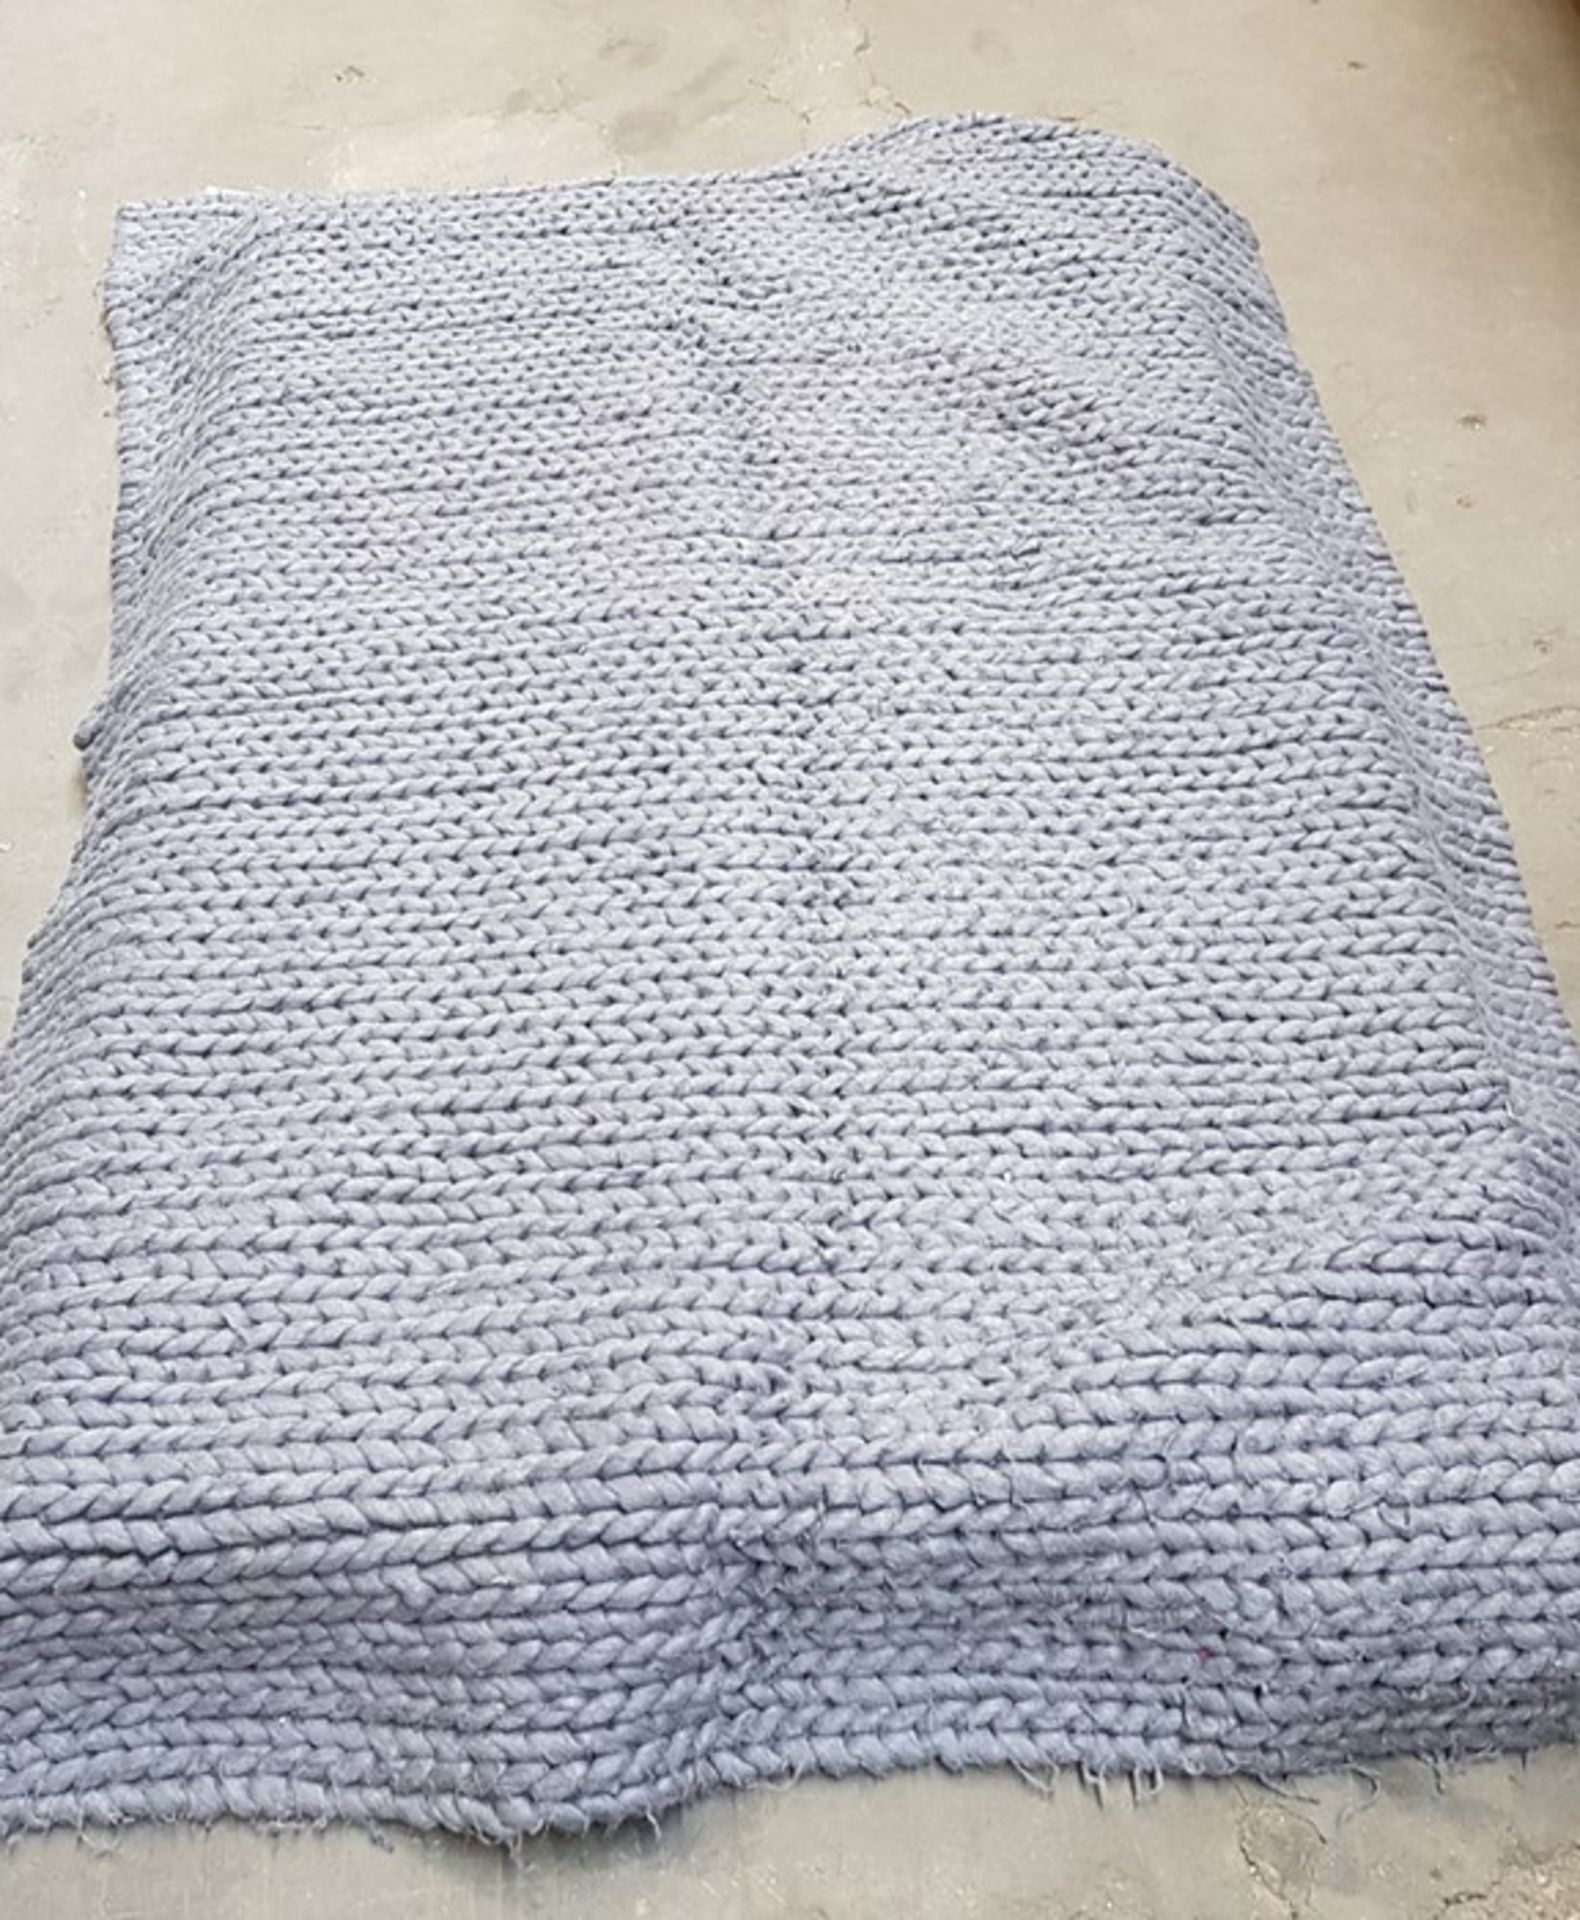 1 LA REDOUTE WOOLLEN RUG WITH LARGE WEAVE IN BLUE / APPROX 160 X 230CM / RRP £179.00 (VIEWING HIGHLY